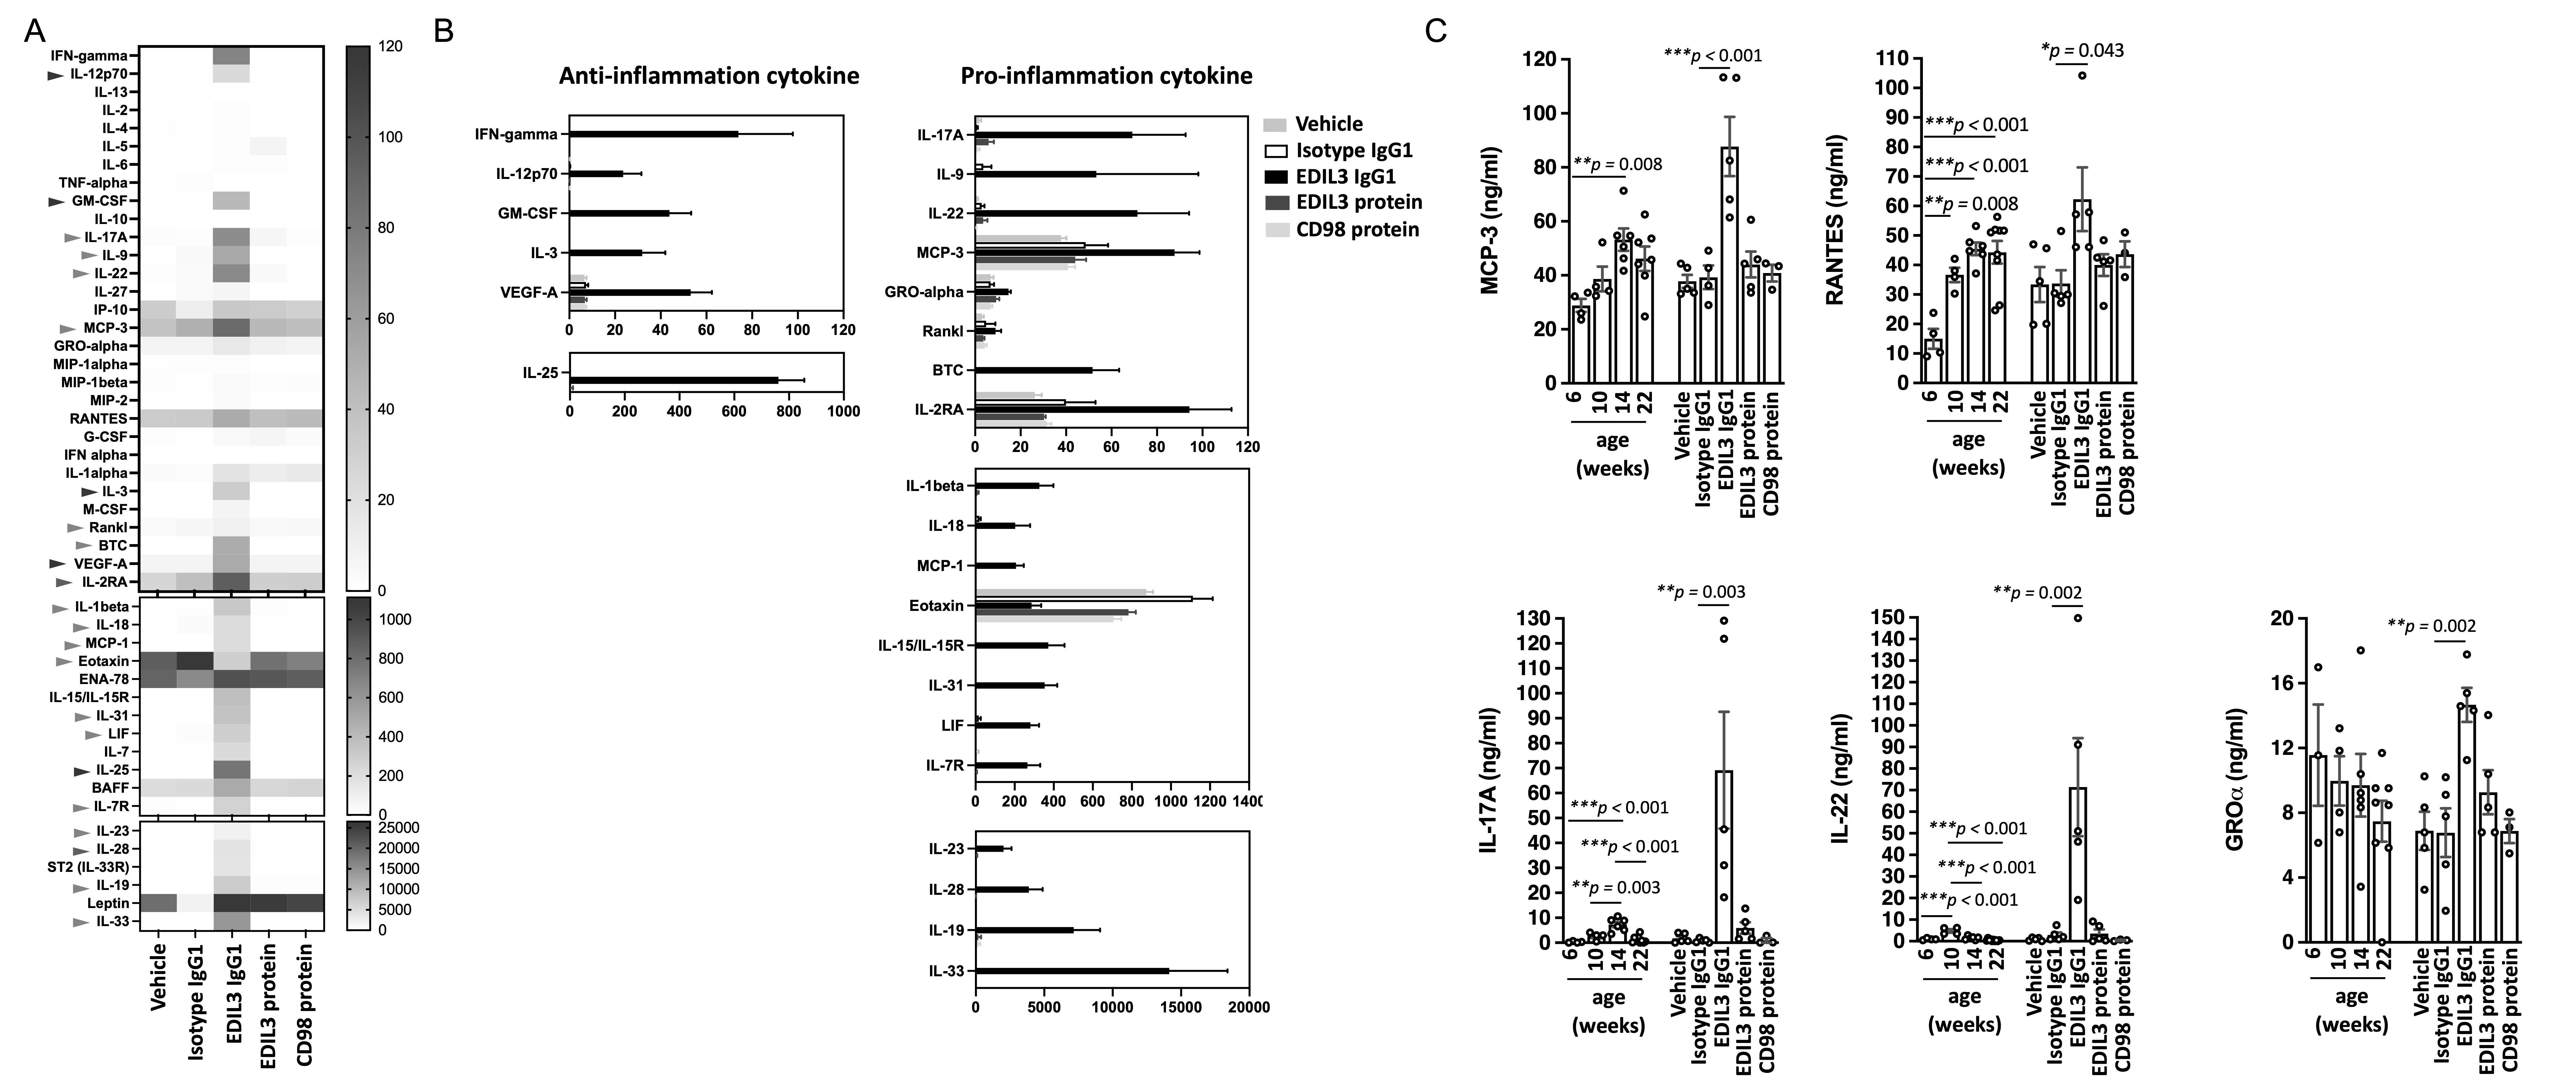 Fig. 5 
            EGF-like repeats and discoidin I-like domains-containing protein 3 (EDIL3) inhibition promotes pro-inflammatory cytokine production in STR/ort mice. a) The variable expressions of 48 cytokines among vehicle control, isotype IgG1, EDIL3 IgG1, recombinant EDIL3 protein, and CD98 protein groups were identified by comparing the expression pattern in the serum of STR/ort mice and those with vehicle control group by heat-map analysis. Arrows indicate representative anti-inflammatory cytokines (red) and pro-inflammatory cytokines (green). b) Quantitation of each cytokine demonstrated serum samples from different groups using Luminex xMAP technology. Six anti-inflammatory cytokines and 20 pro-inflammatory cytokines were identified with the most significant difference between the five groups. c) Notably, many pro-inflammatory cytokines in serum increase with ageing, including monocyte chemotactic protein-3 (MCP-3), RANTES, interleukin (IL)-17A, IL-22, and GRO-alpha. EDIL3 antibody significantly promoted the increase of these pro-inflammatory cytokines. Analyses were conducted with one-way analysis of variance (ANOVA) followed by Tukey’s multiple comparisons test for selected pairs of groups. Data are presented as means and standard errors. *p < 0.05, **p < 0.01, ***p < 0.001. Data presented in Figure 5c were analyzed using one-way analysis of variance followed by Tukey’s multiple comparison test for selected pairs of groups for multiple comparisons. IgG, immunoglobulin G.
          